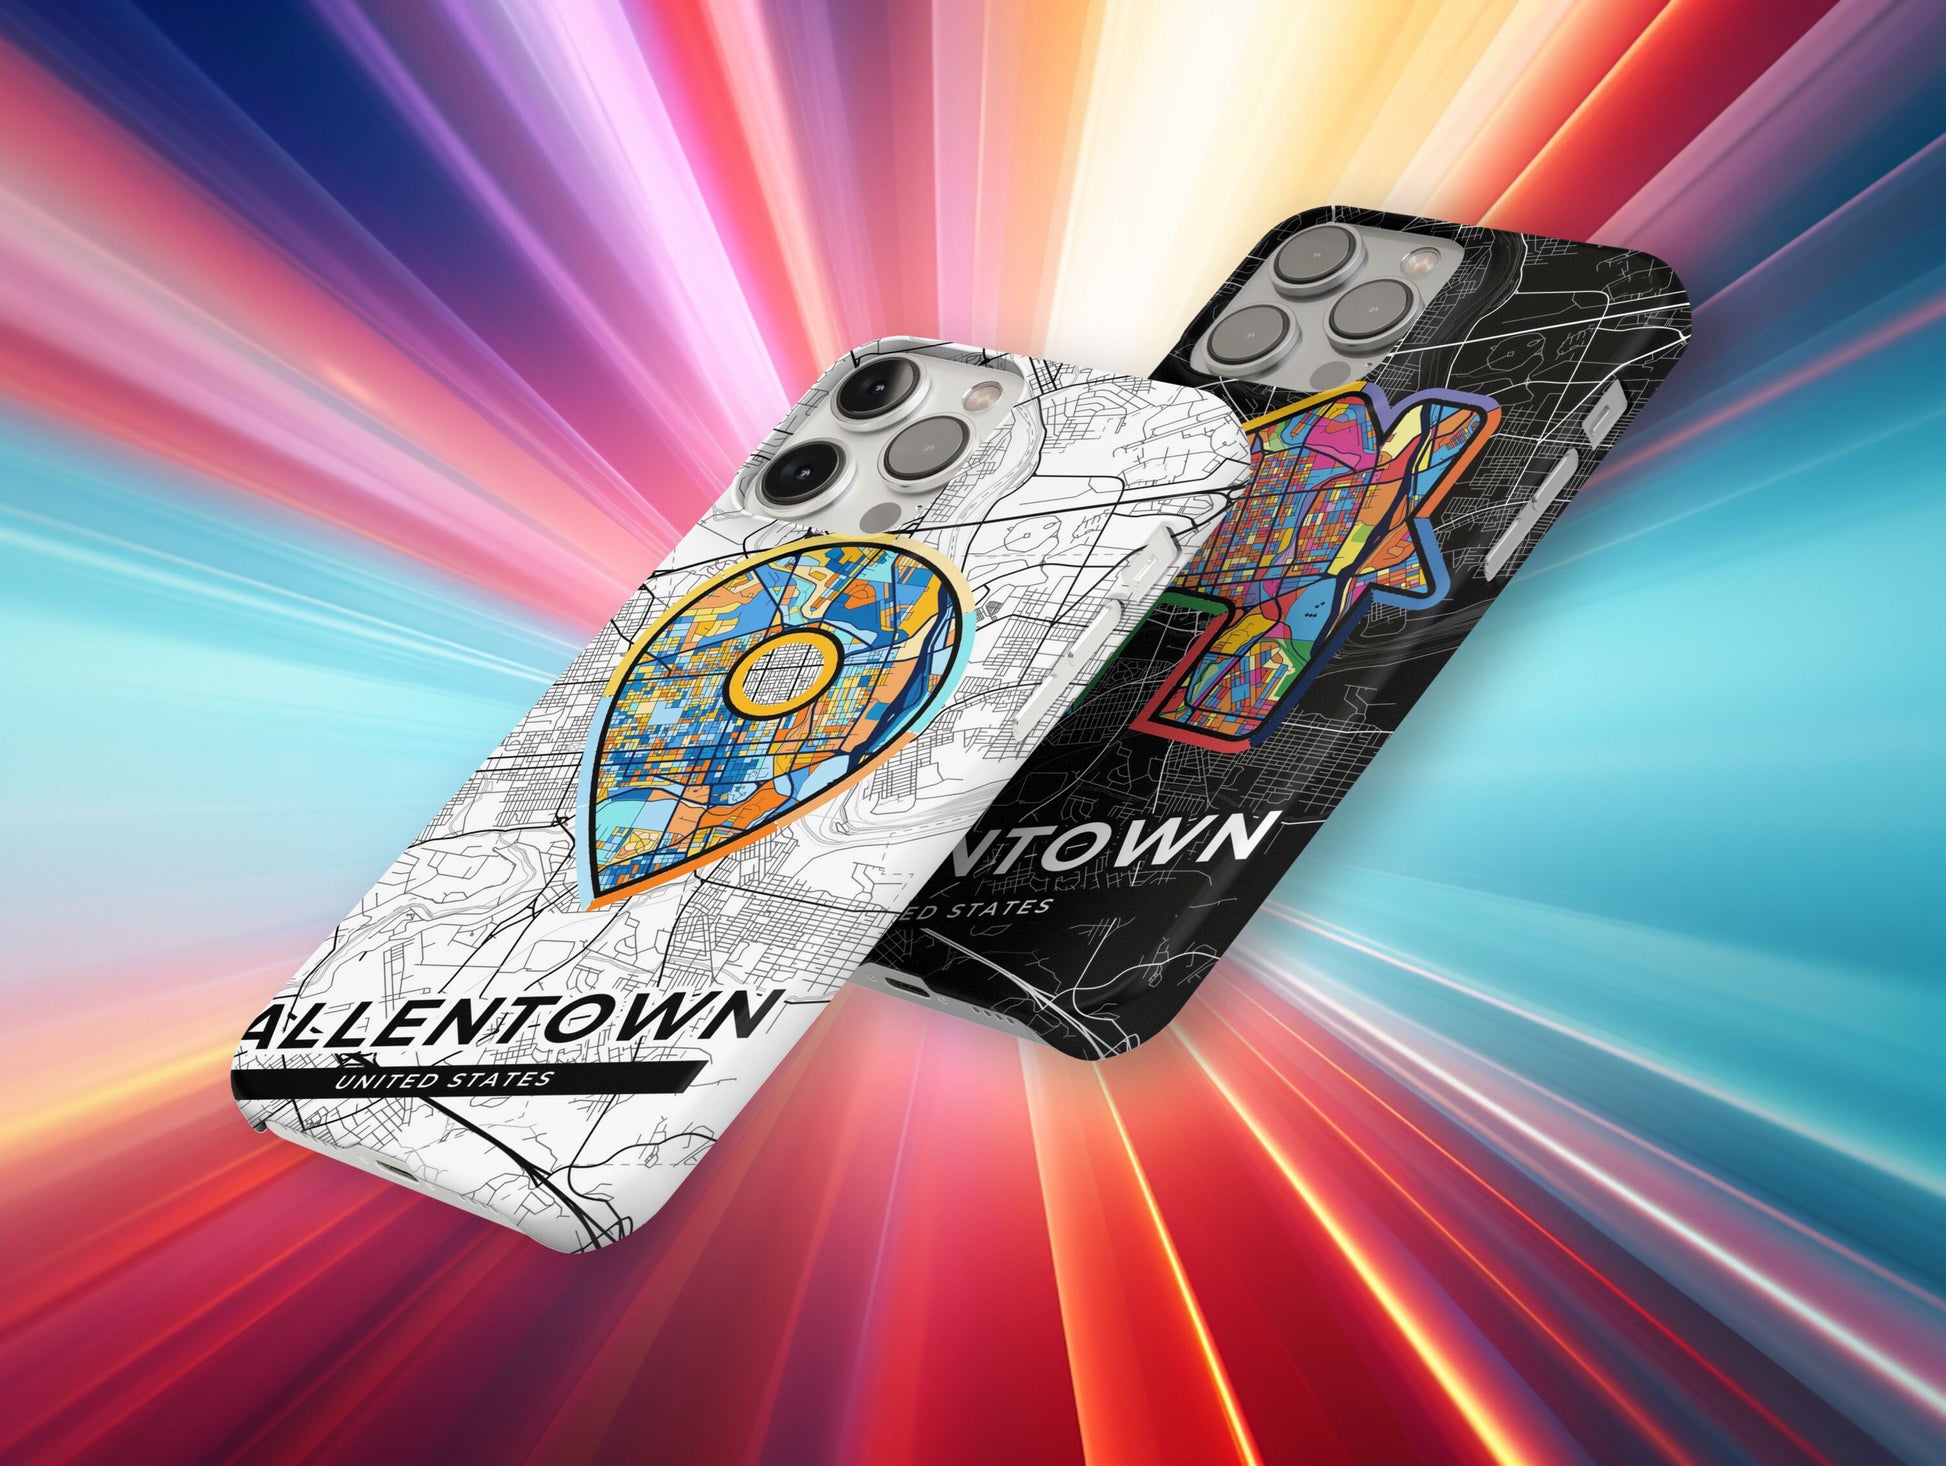 Allentown Pennsylvania slim phone case with colorful icon. Birthday, wedding or housewarming gift. Couple match cases.